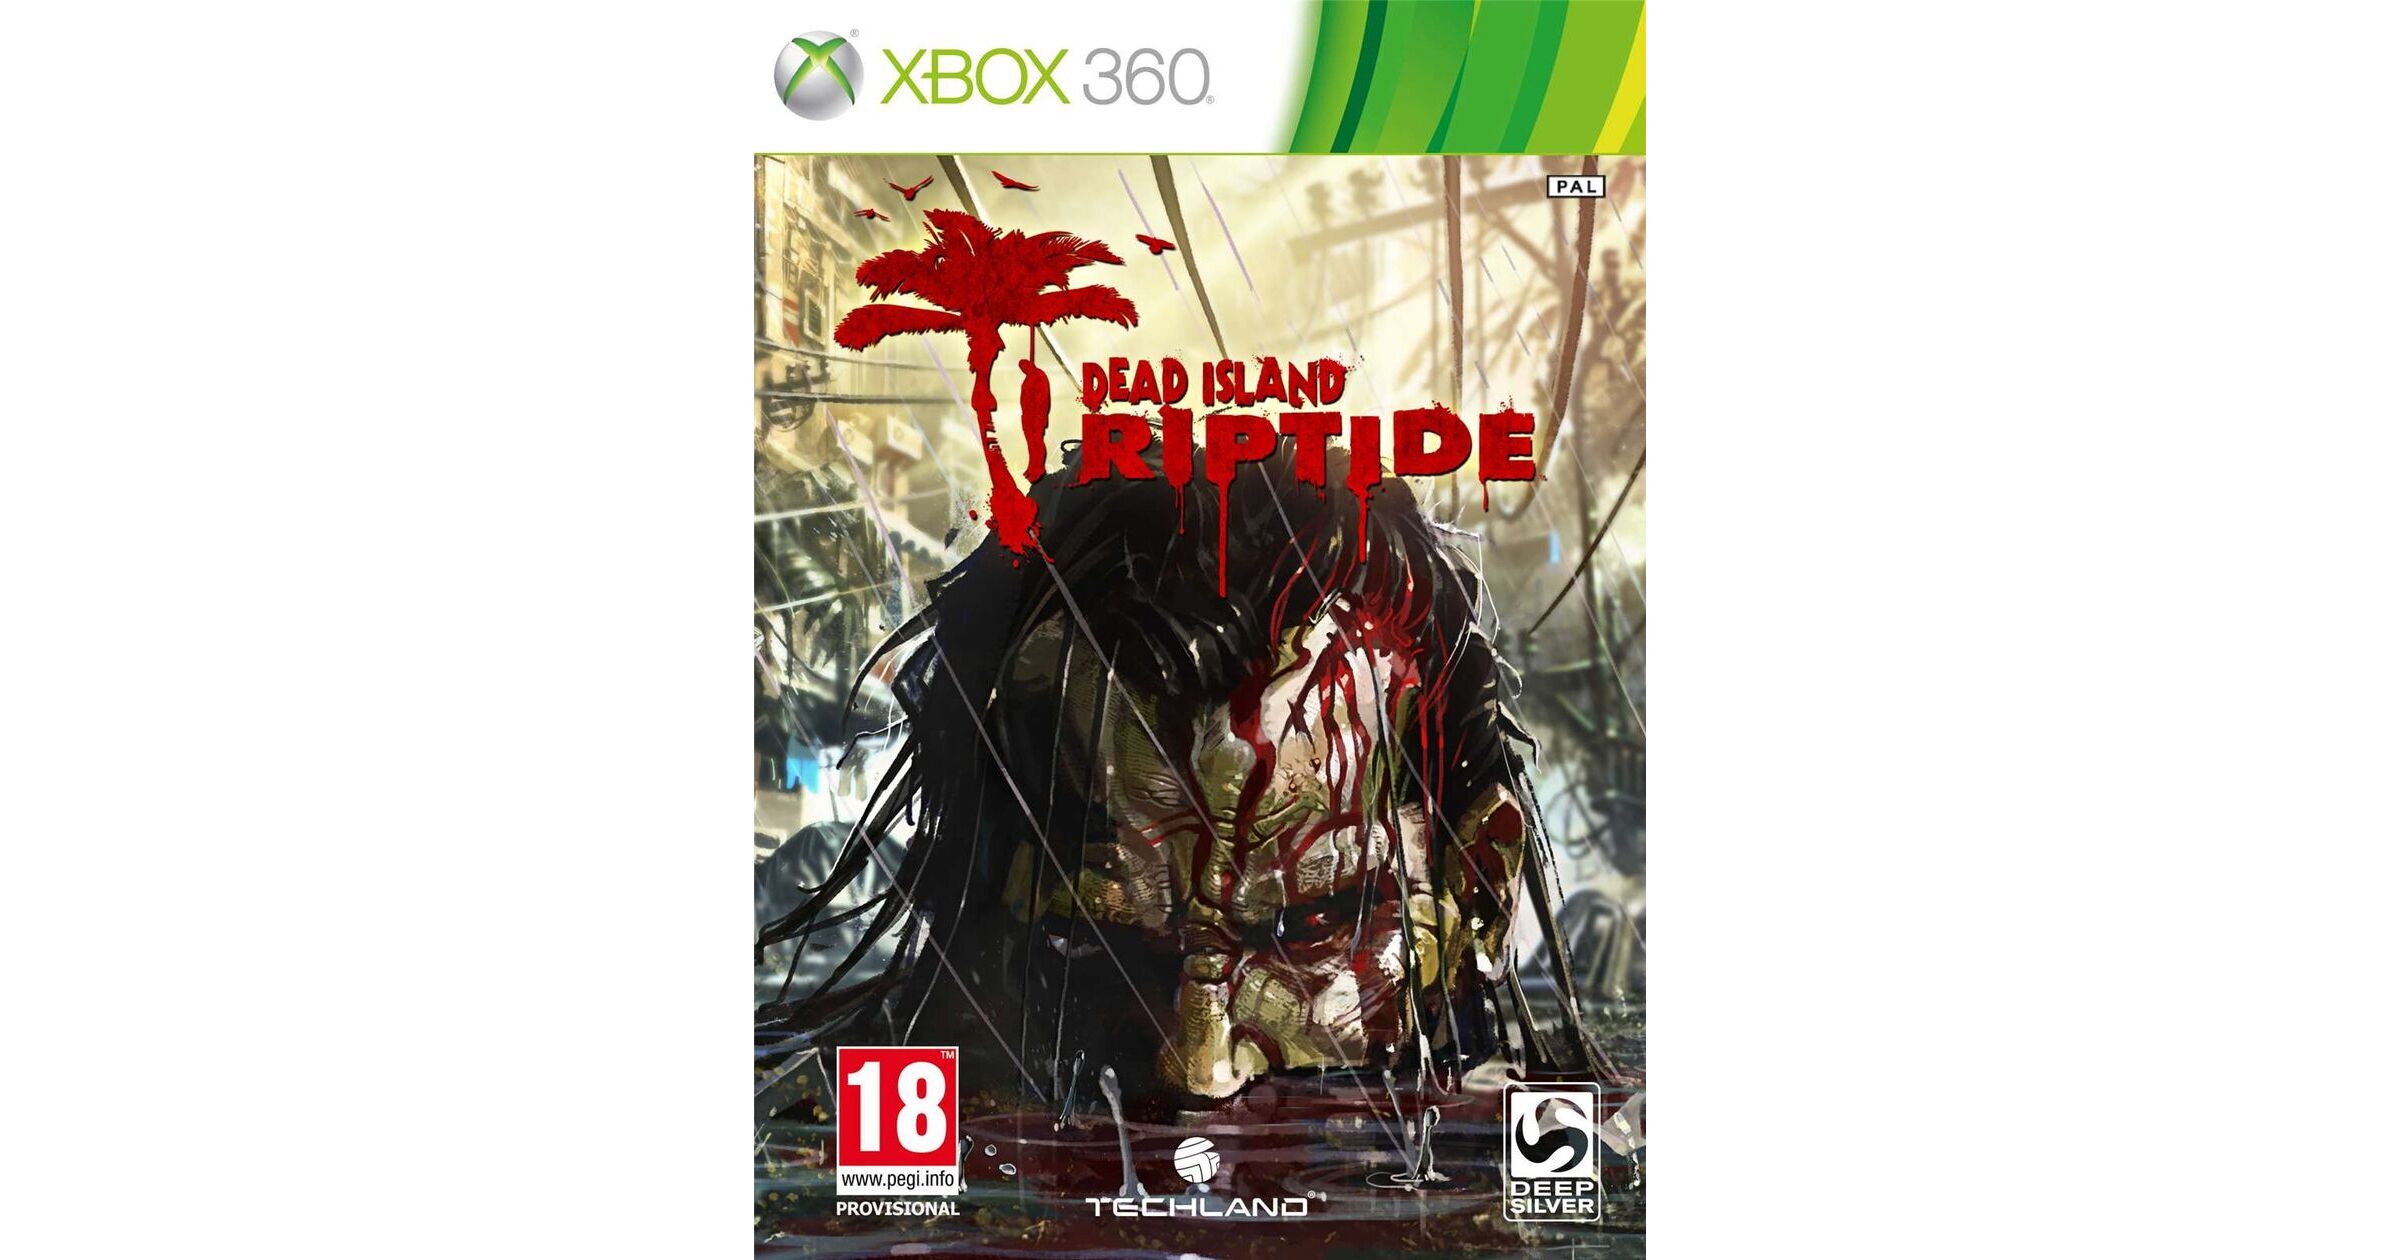 how to play 2 player on dead island riptide xbox 360